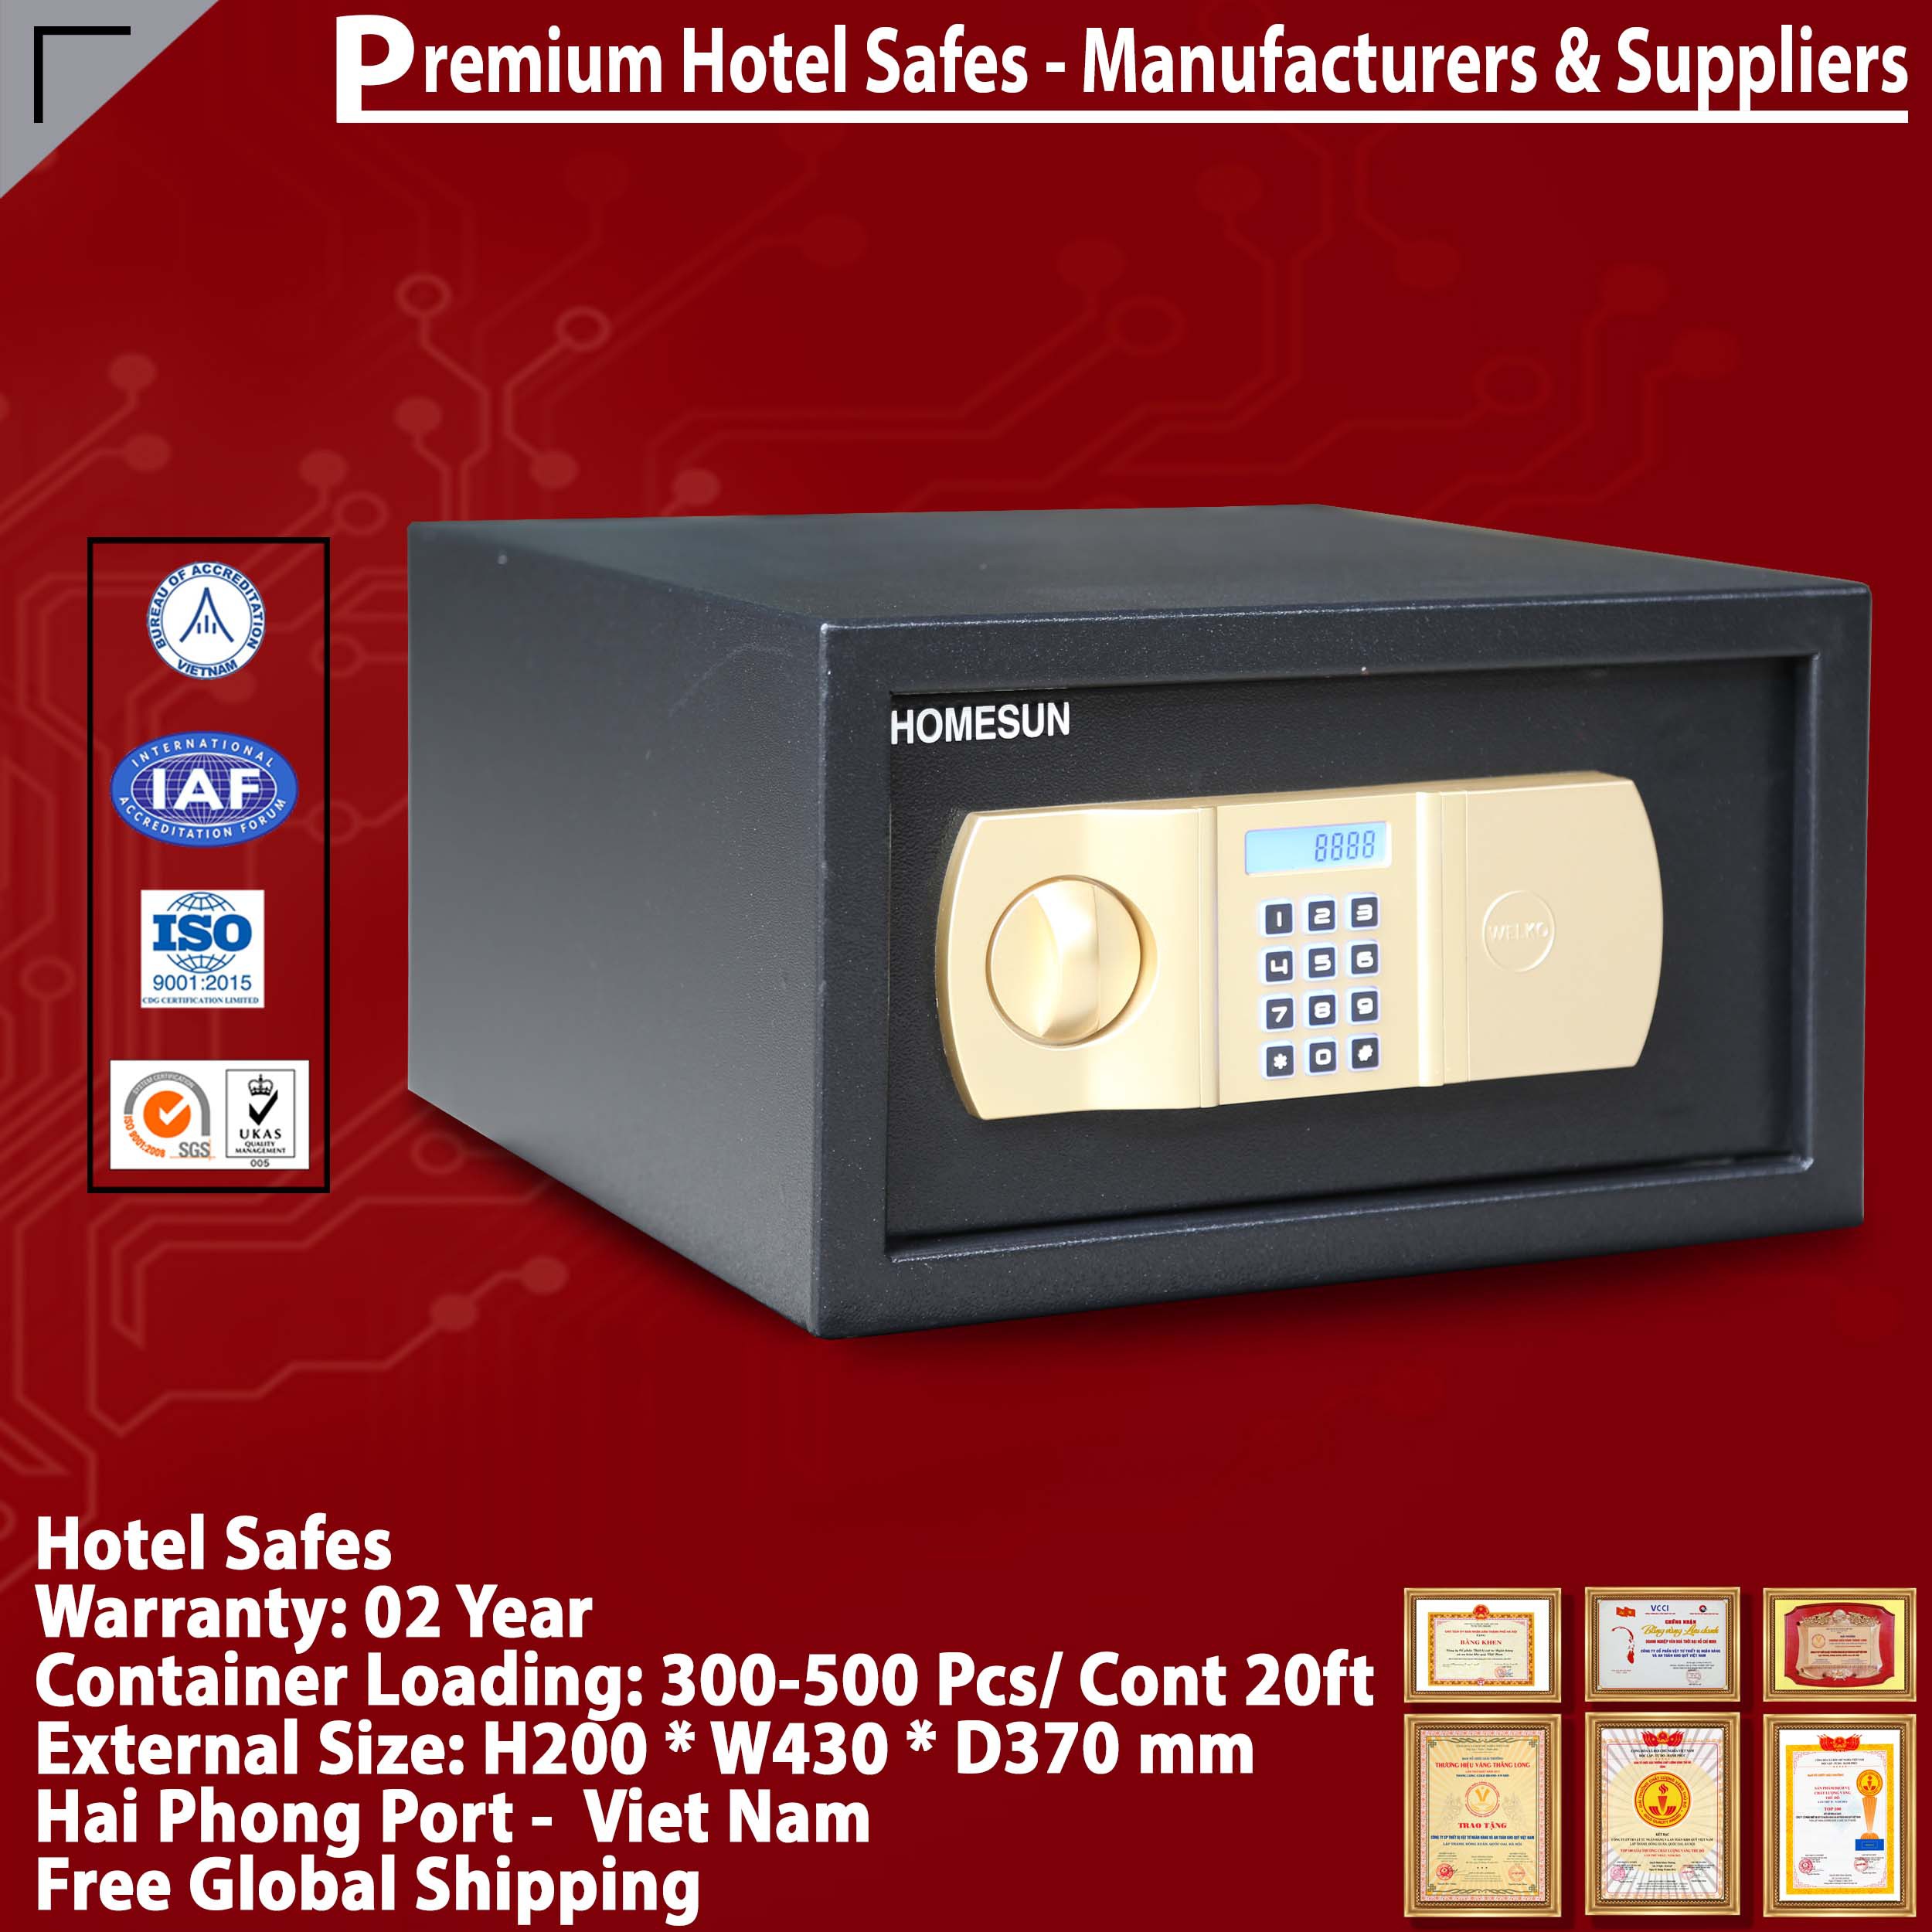 Safes in Hotel Manufacturing Facility